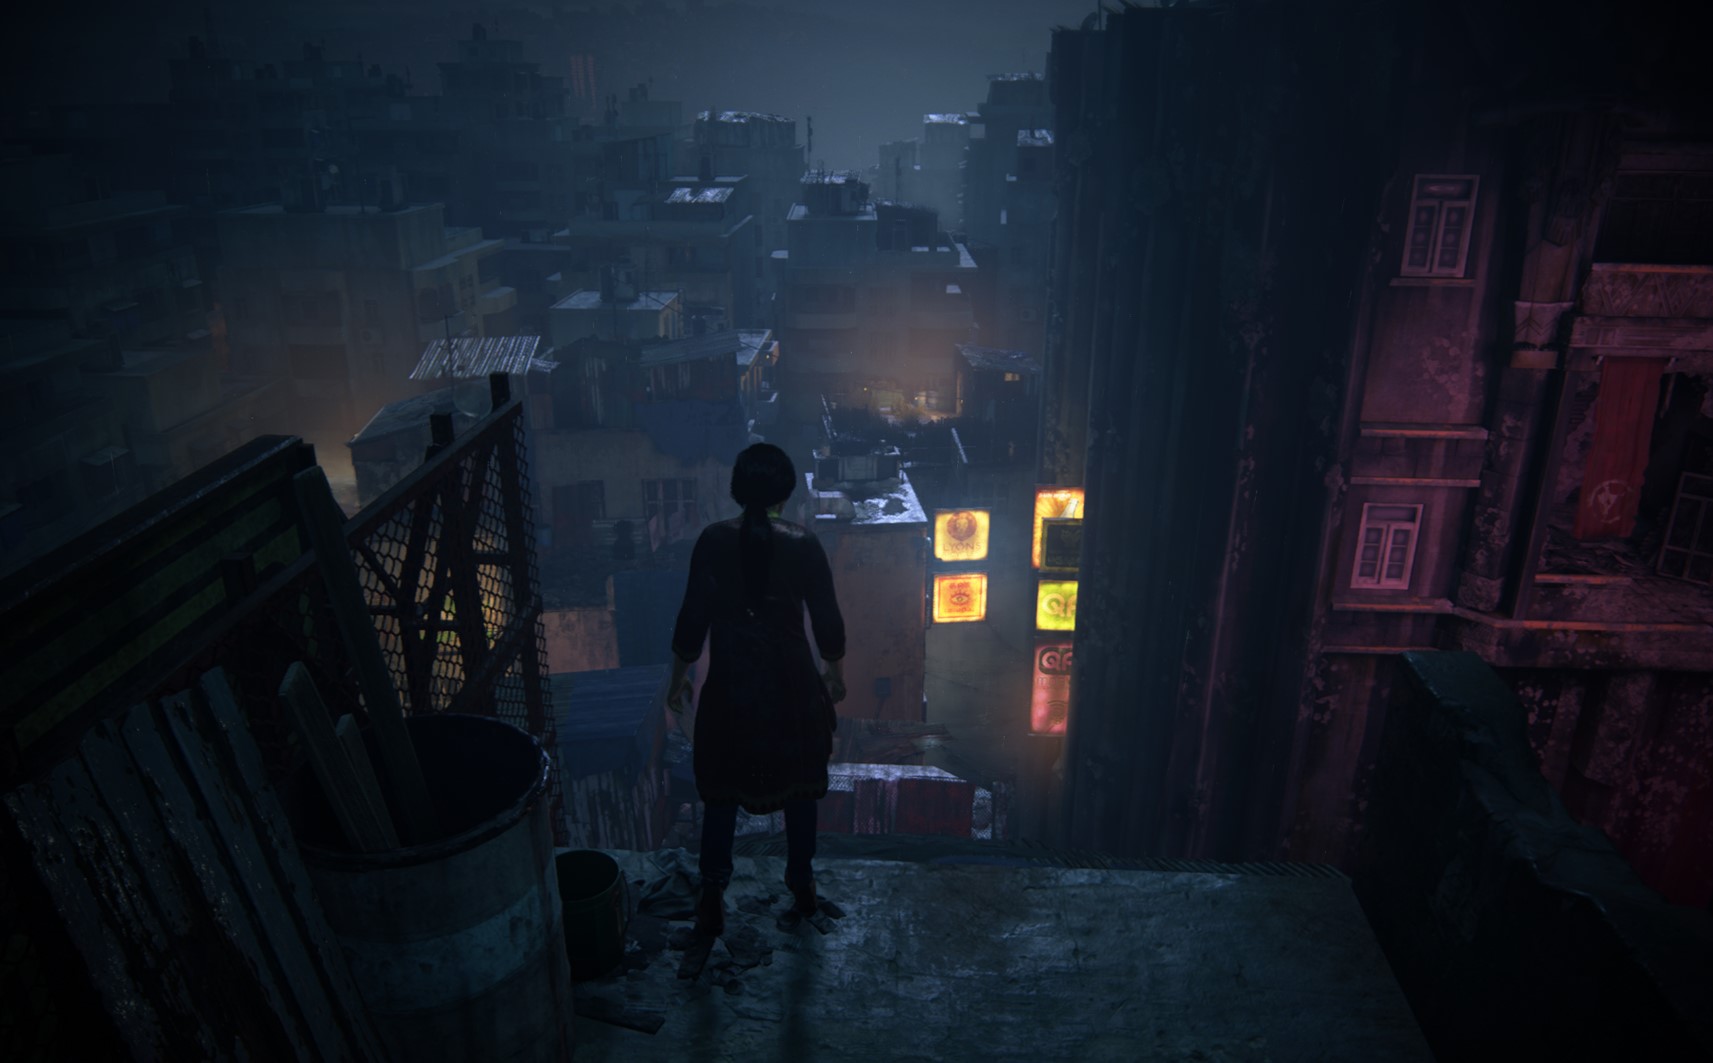 Review: Uncharted: Legacy Of Thieves Collection is spectacular on PC :  r/pcgaming